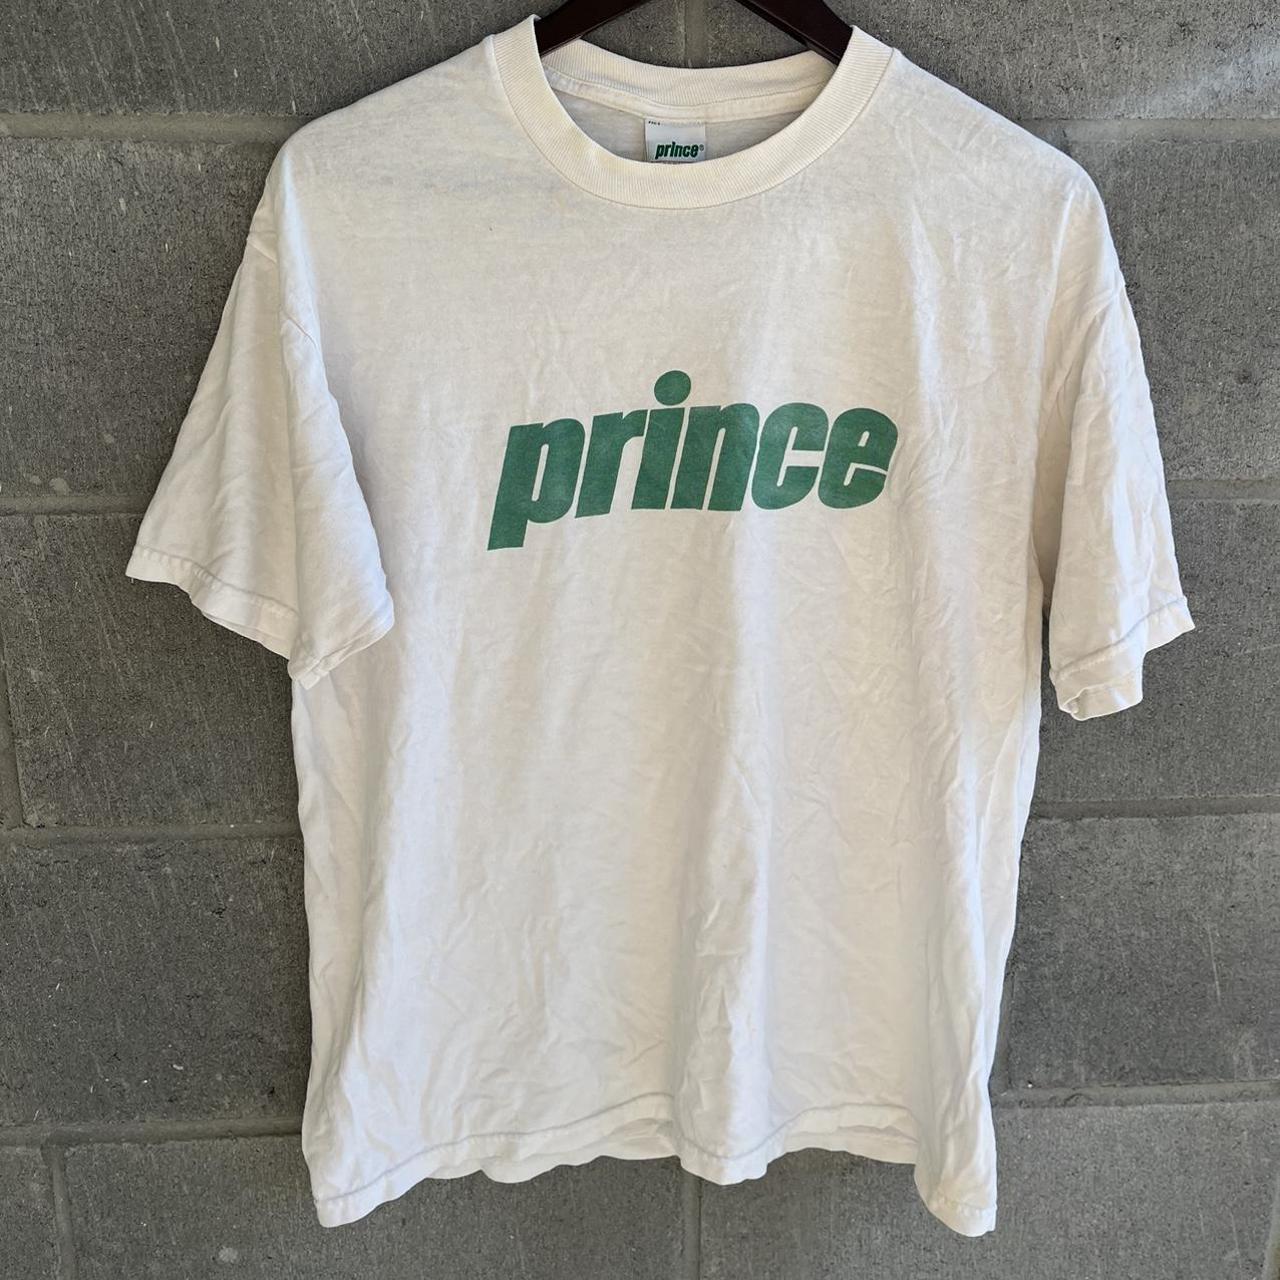 Product Image 1 - prince sportswear tshirt 

-great condition